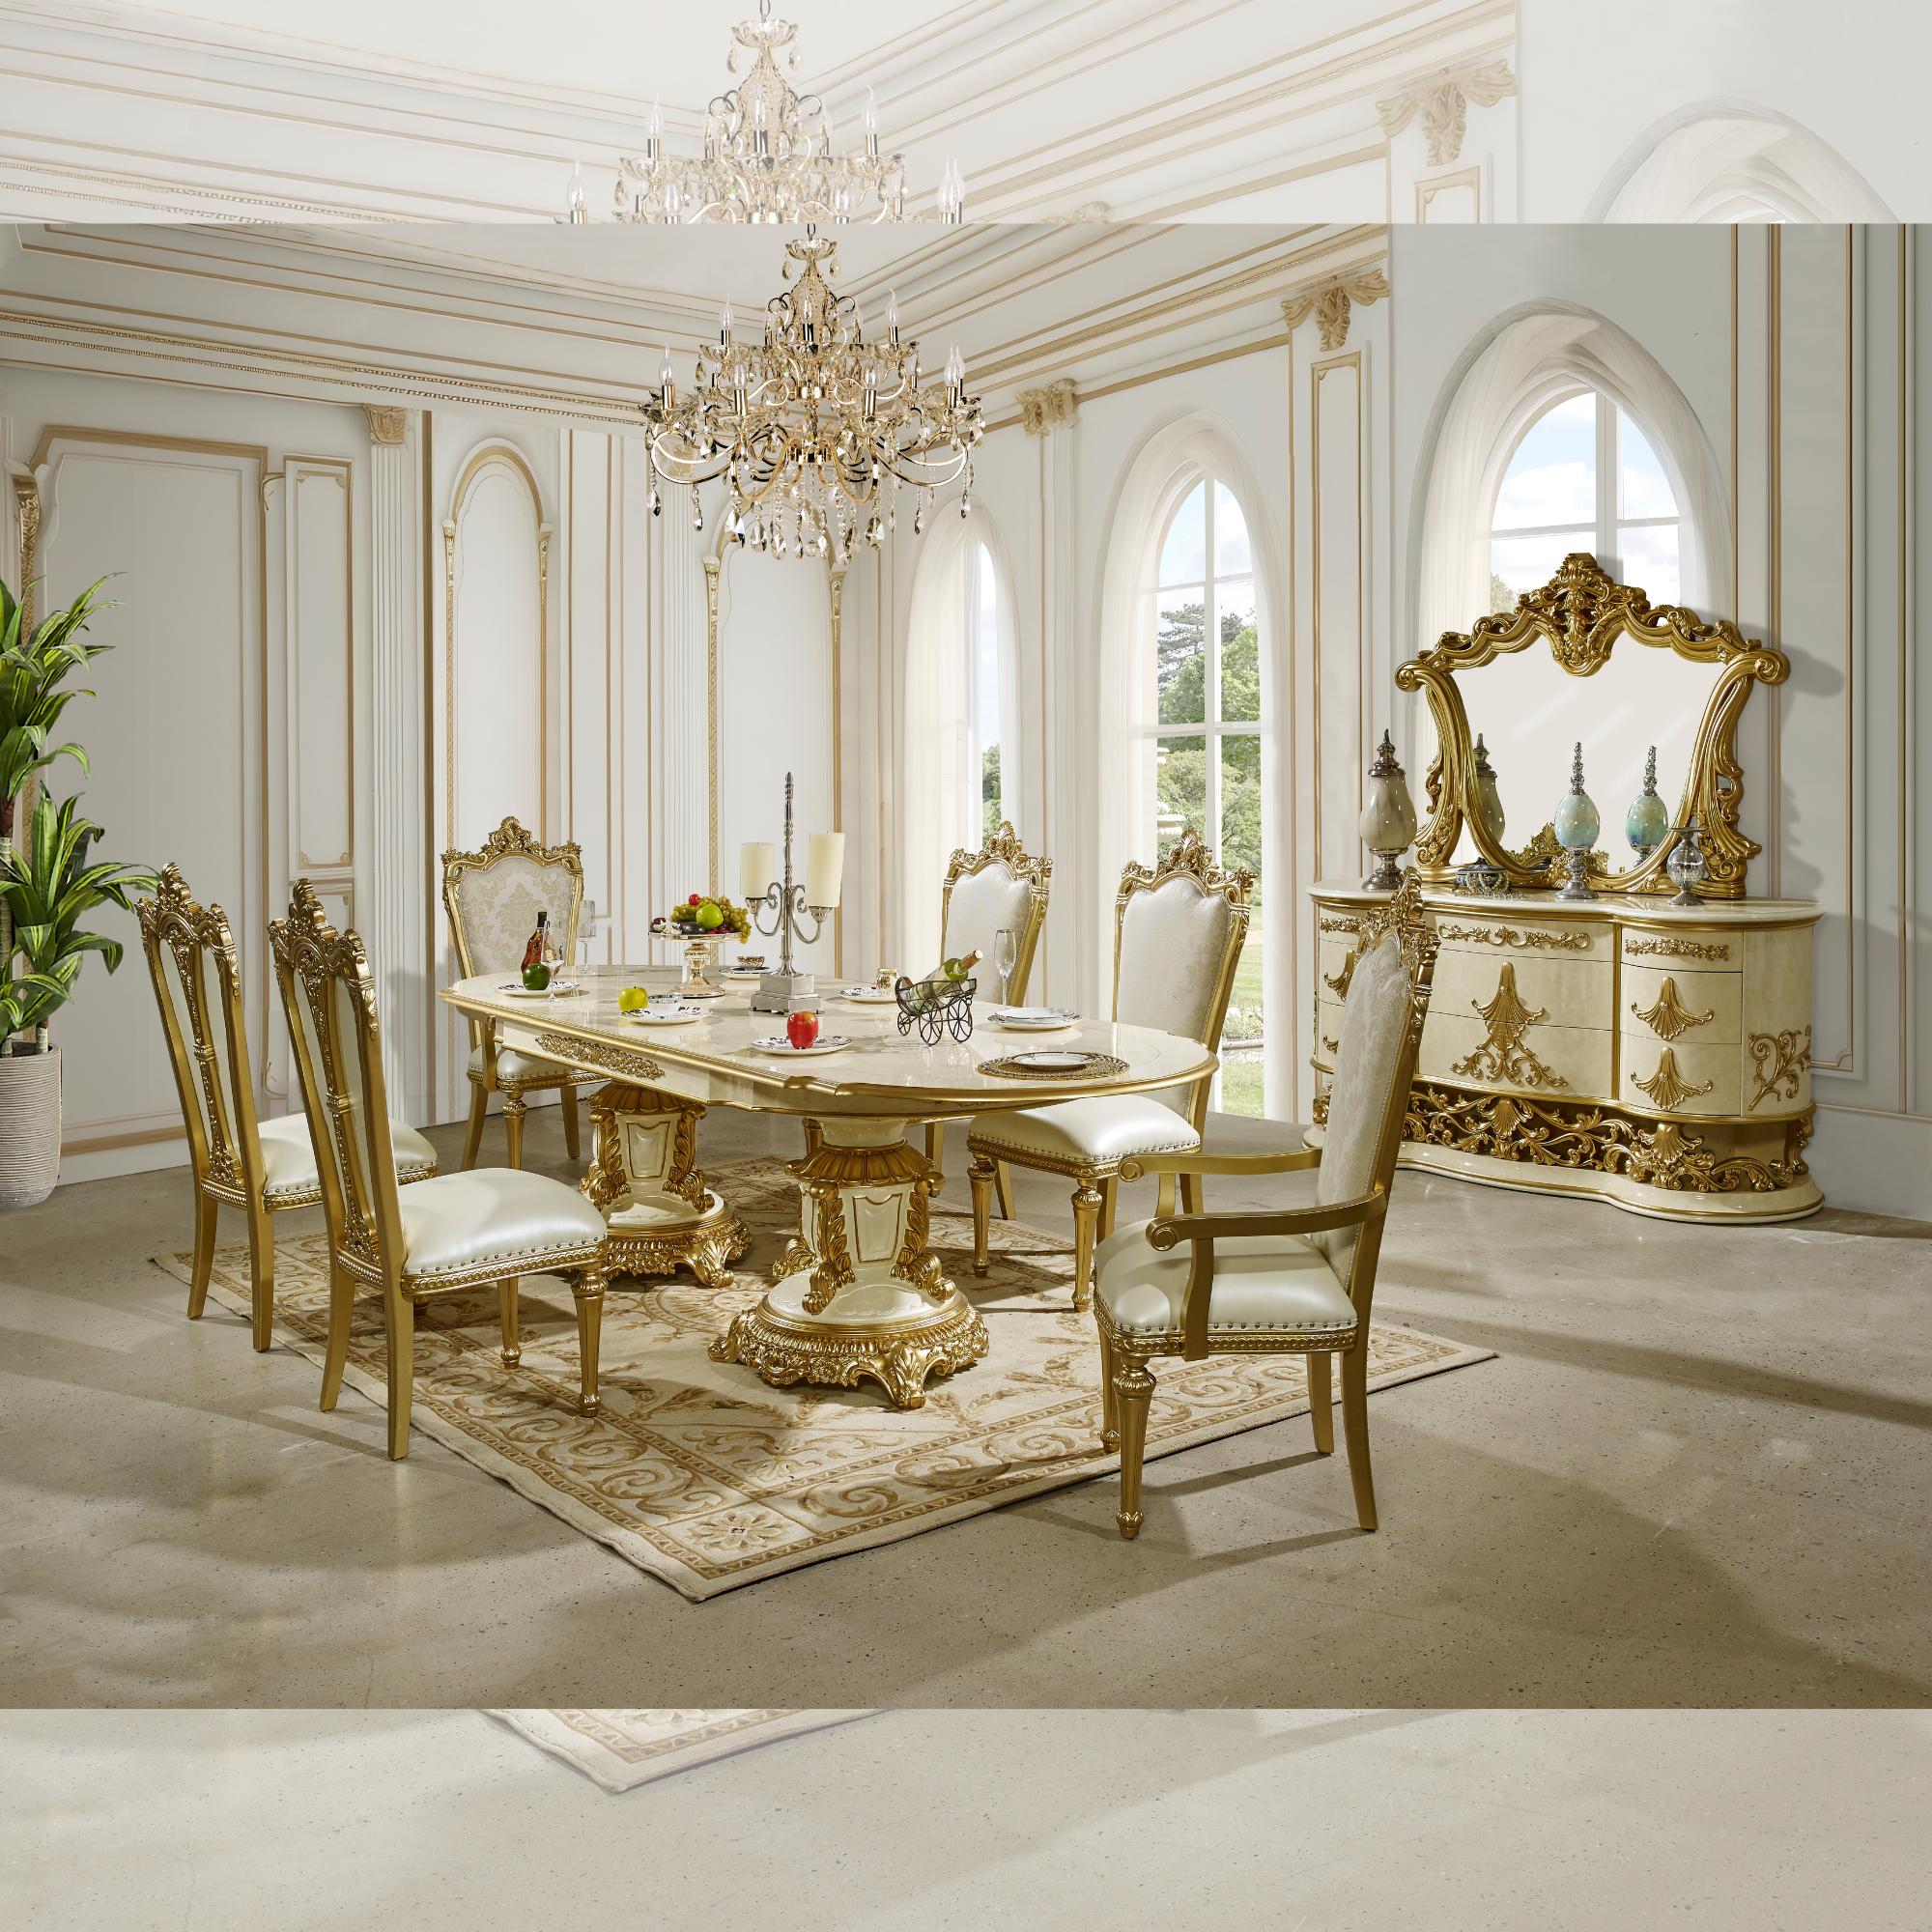 Classic, Traditional Dining Room Set HD-5133 Dining Room Set 7PCS HD-DIN5133-SET HD-DIN5133-SET in White, Gold Leather